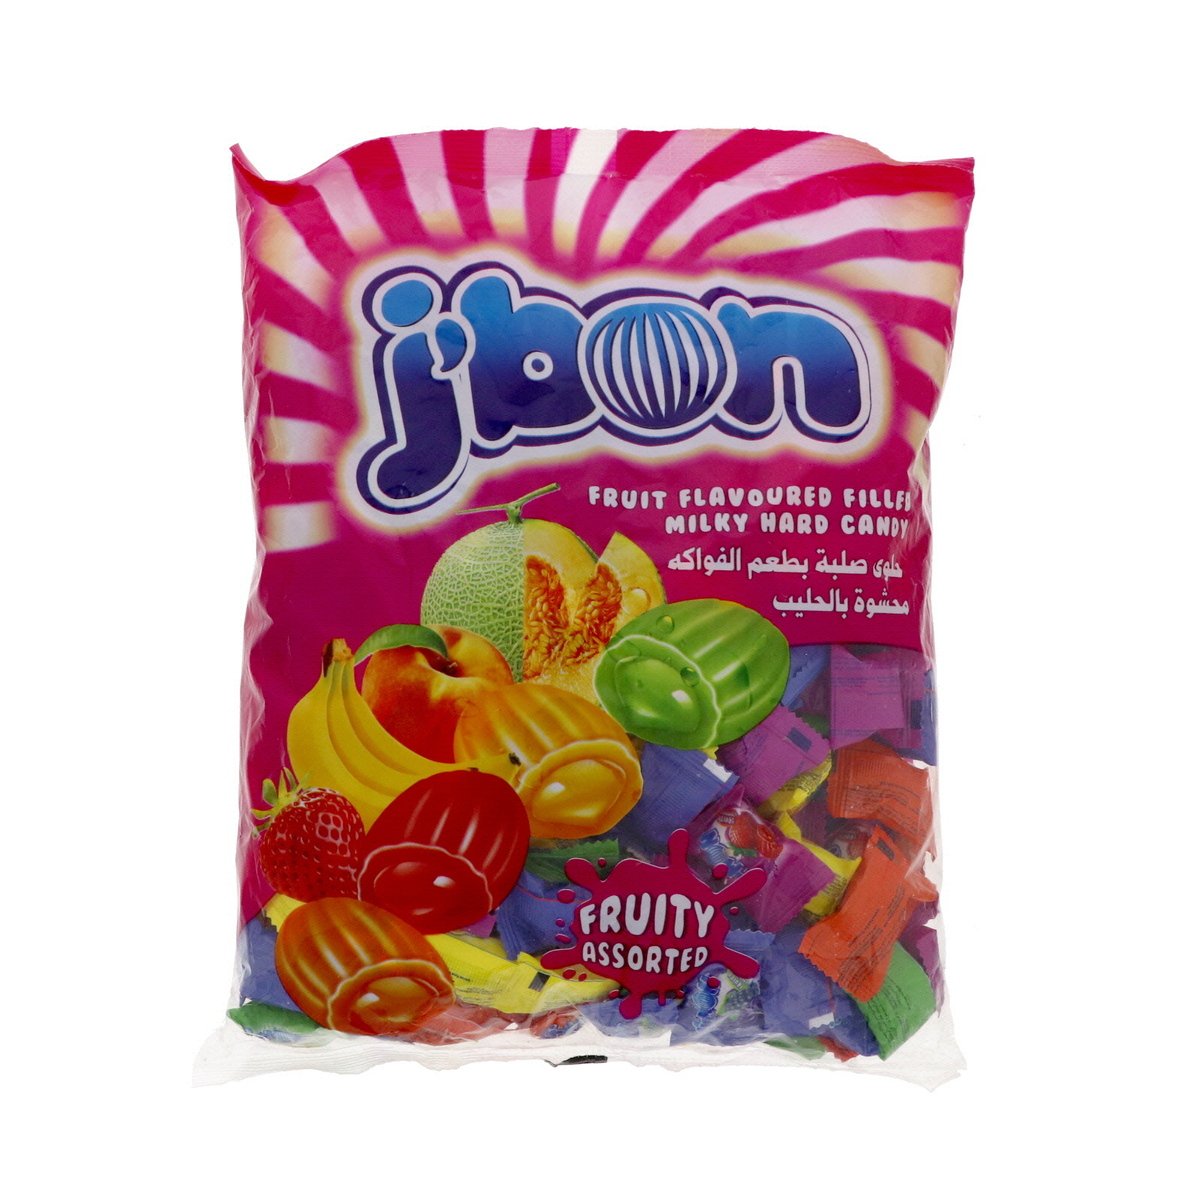 Buy Storck Campino Fruits Flavour Candies 200g Online